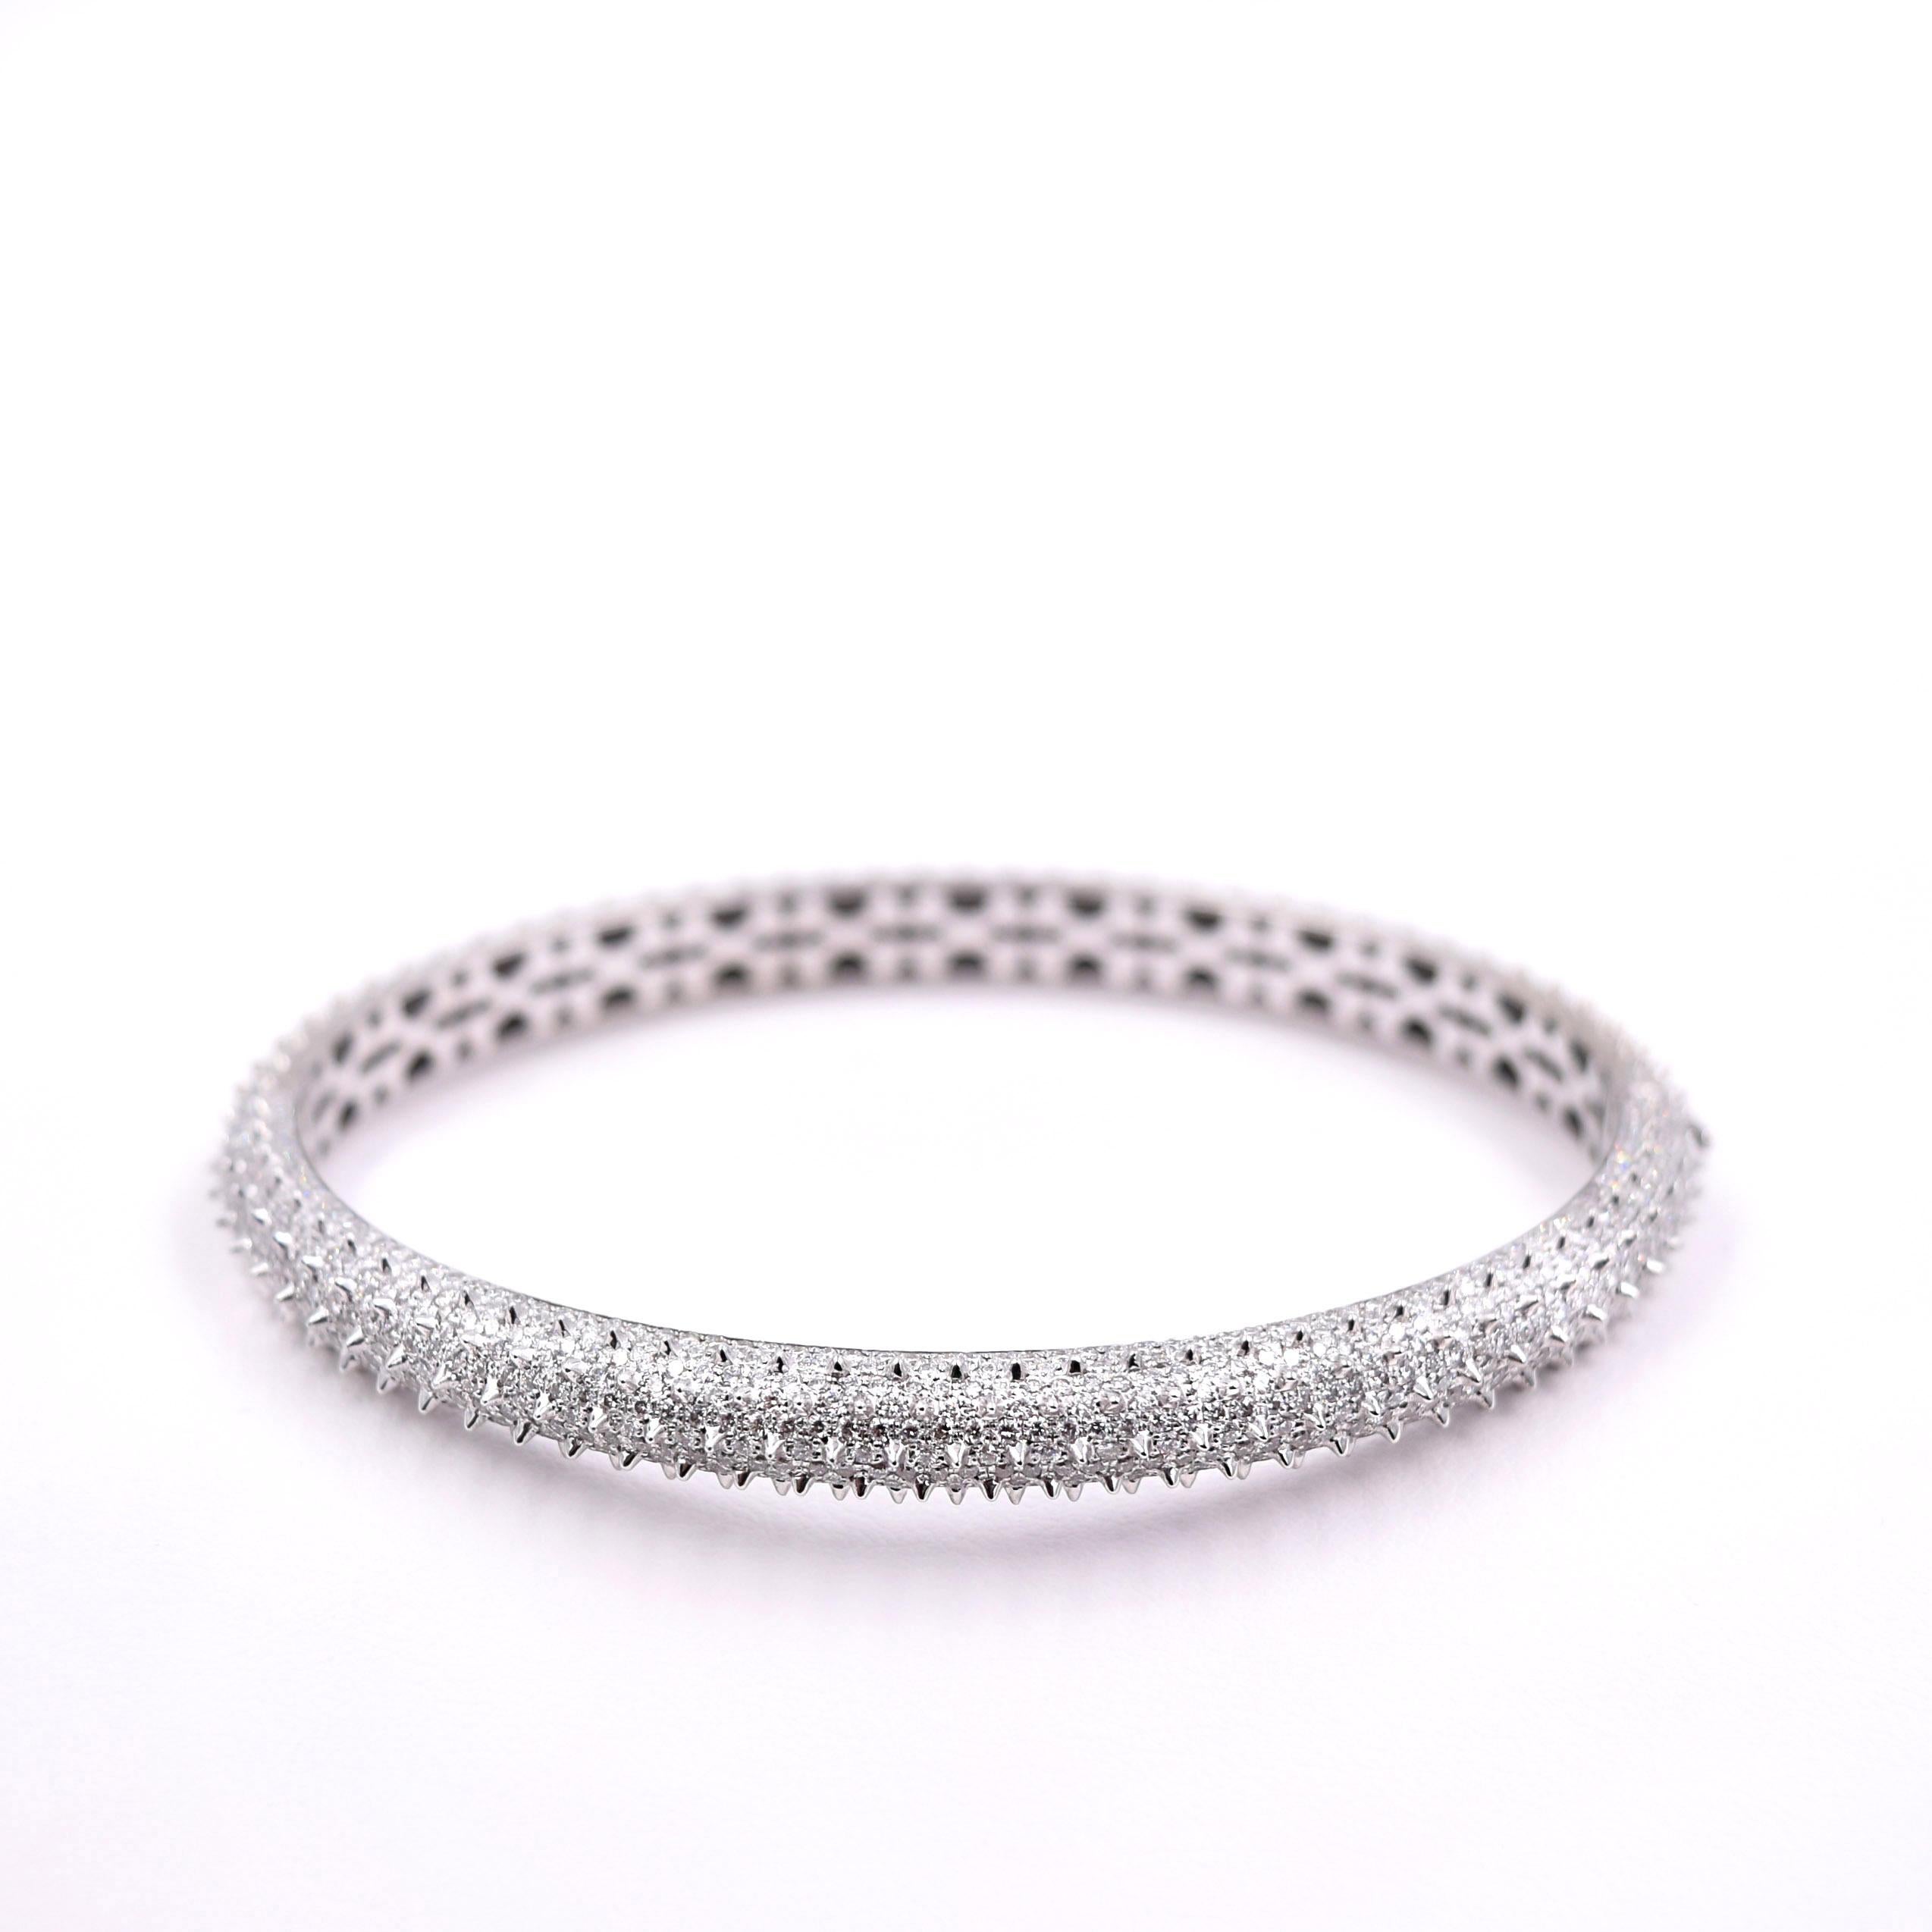 One of a kind 18k white gold spike bangle bracelet with 636 white diamonds totaling 3.5 carats.
Made to order. All diamonds set by hand - please allow two weeks.